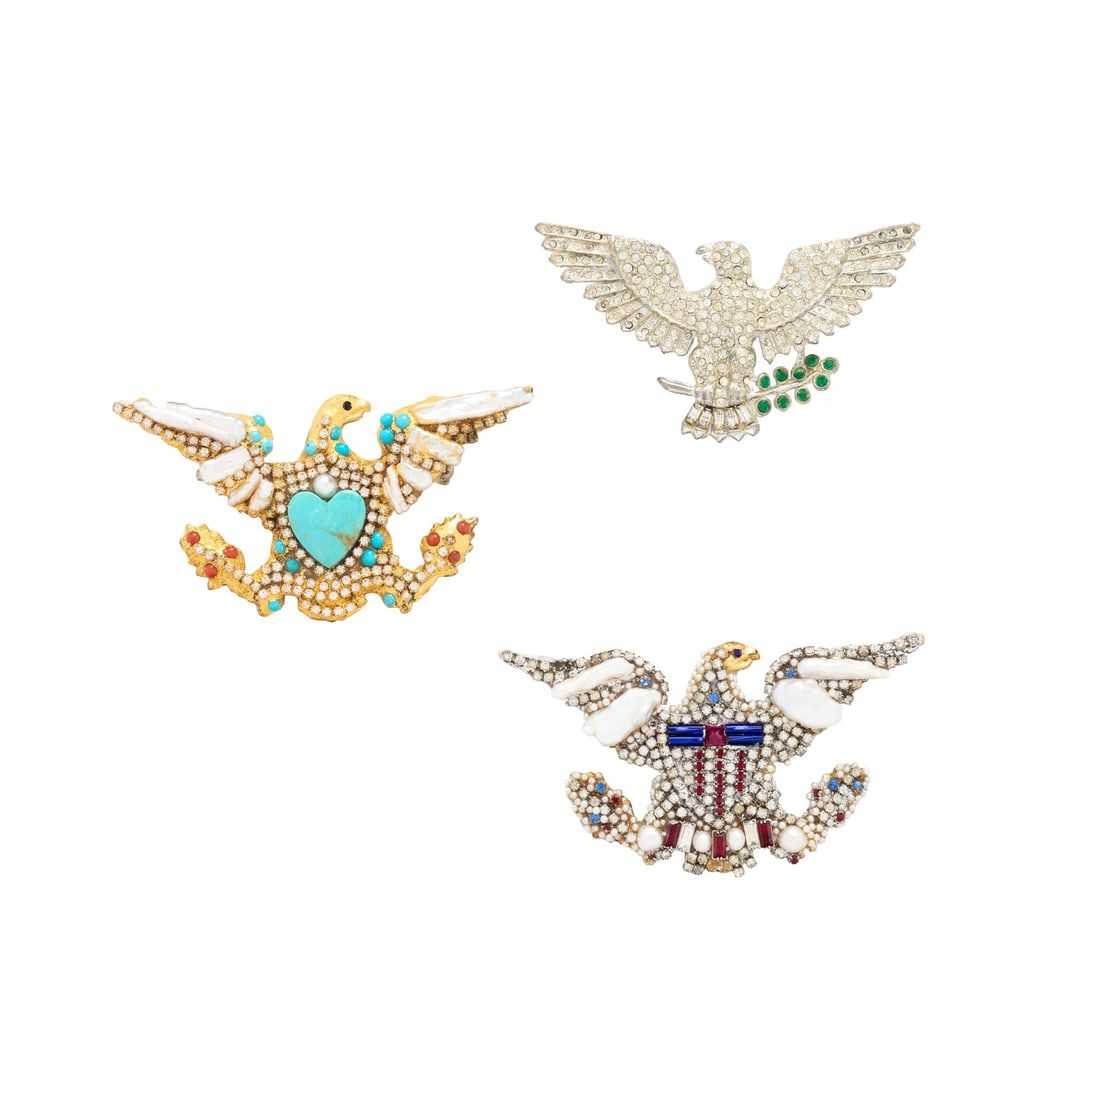 Collection of costume jewelry eagle pins, including two by Carol Sarkisian, estimated at $500-$700 at Freeman’s Hindman.